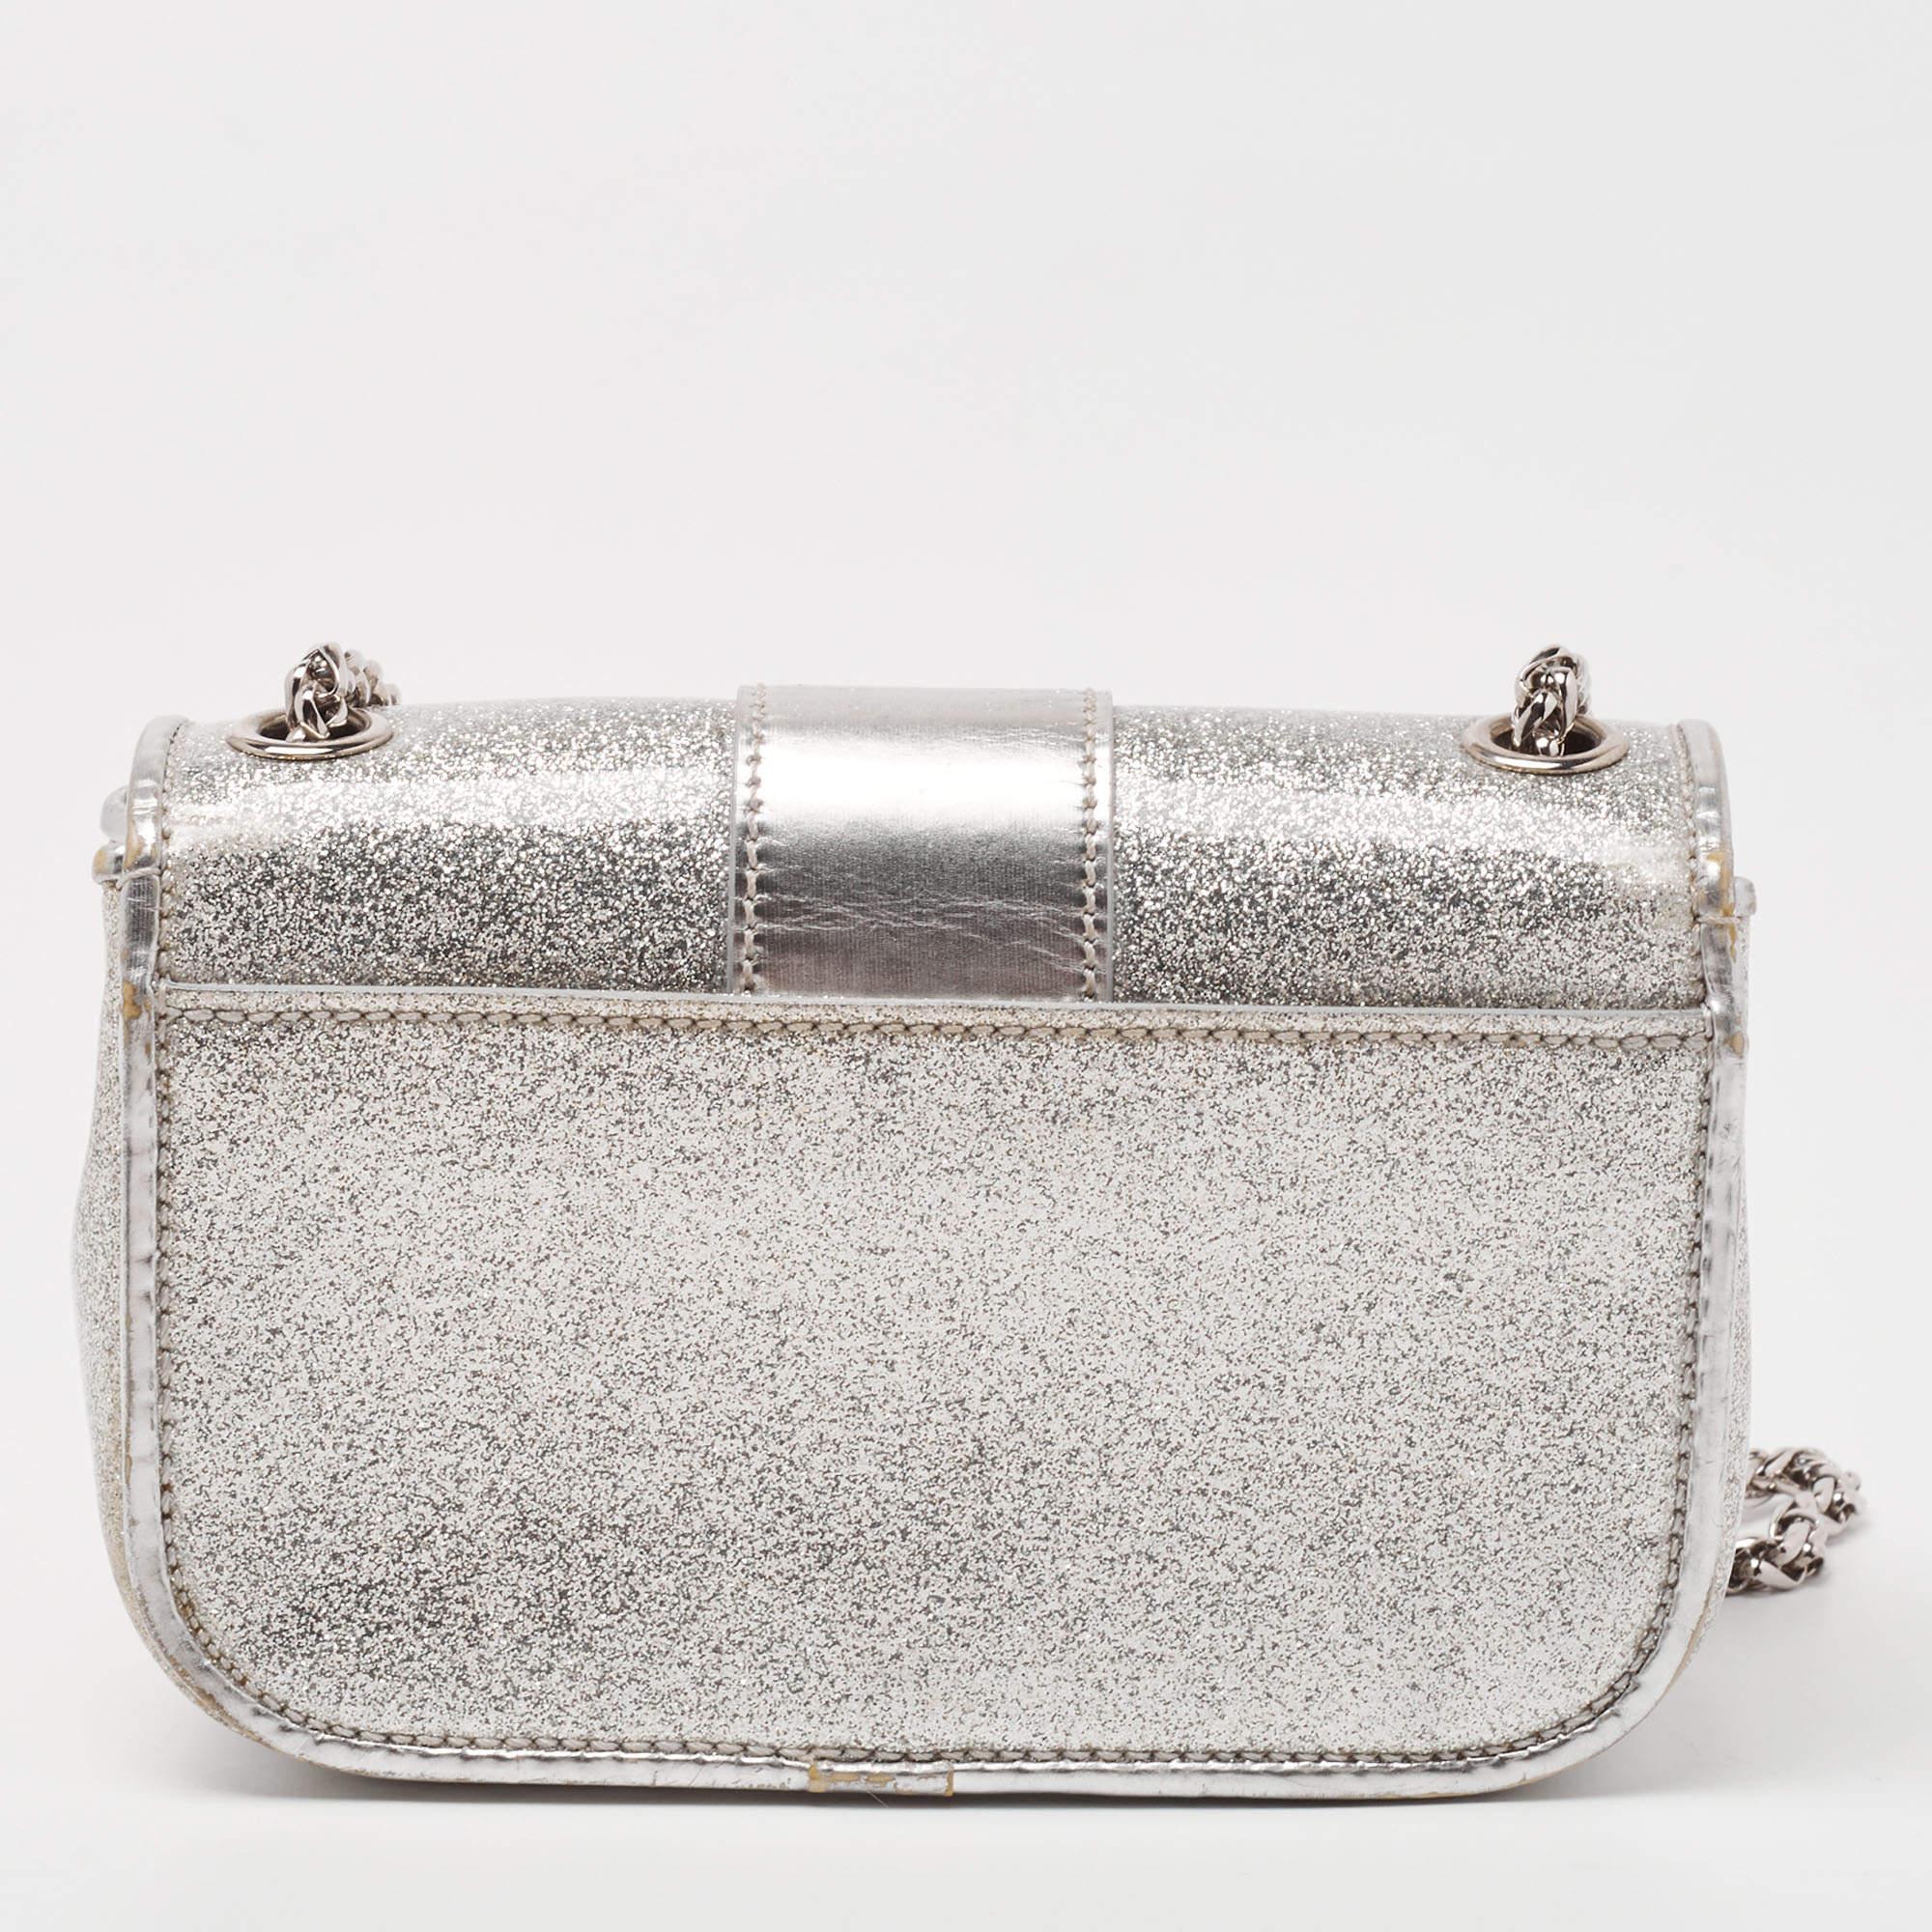 This modern and edgy Sweet Charity bag is from Christian Louboutin. Crafted from silver patent leather, the bag comes with eye-catching spike embellishments and signature Loubi bow detail. The insides are fabric-lined and the bag is complete with a